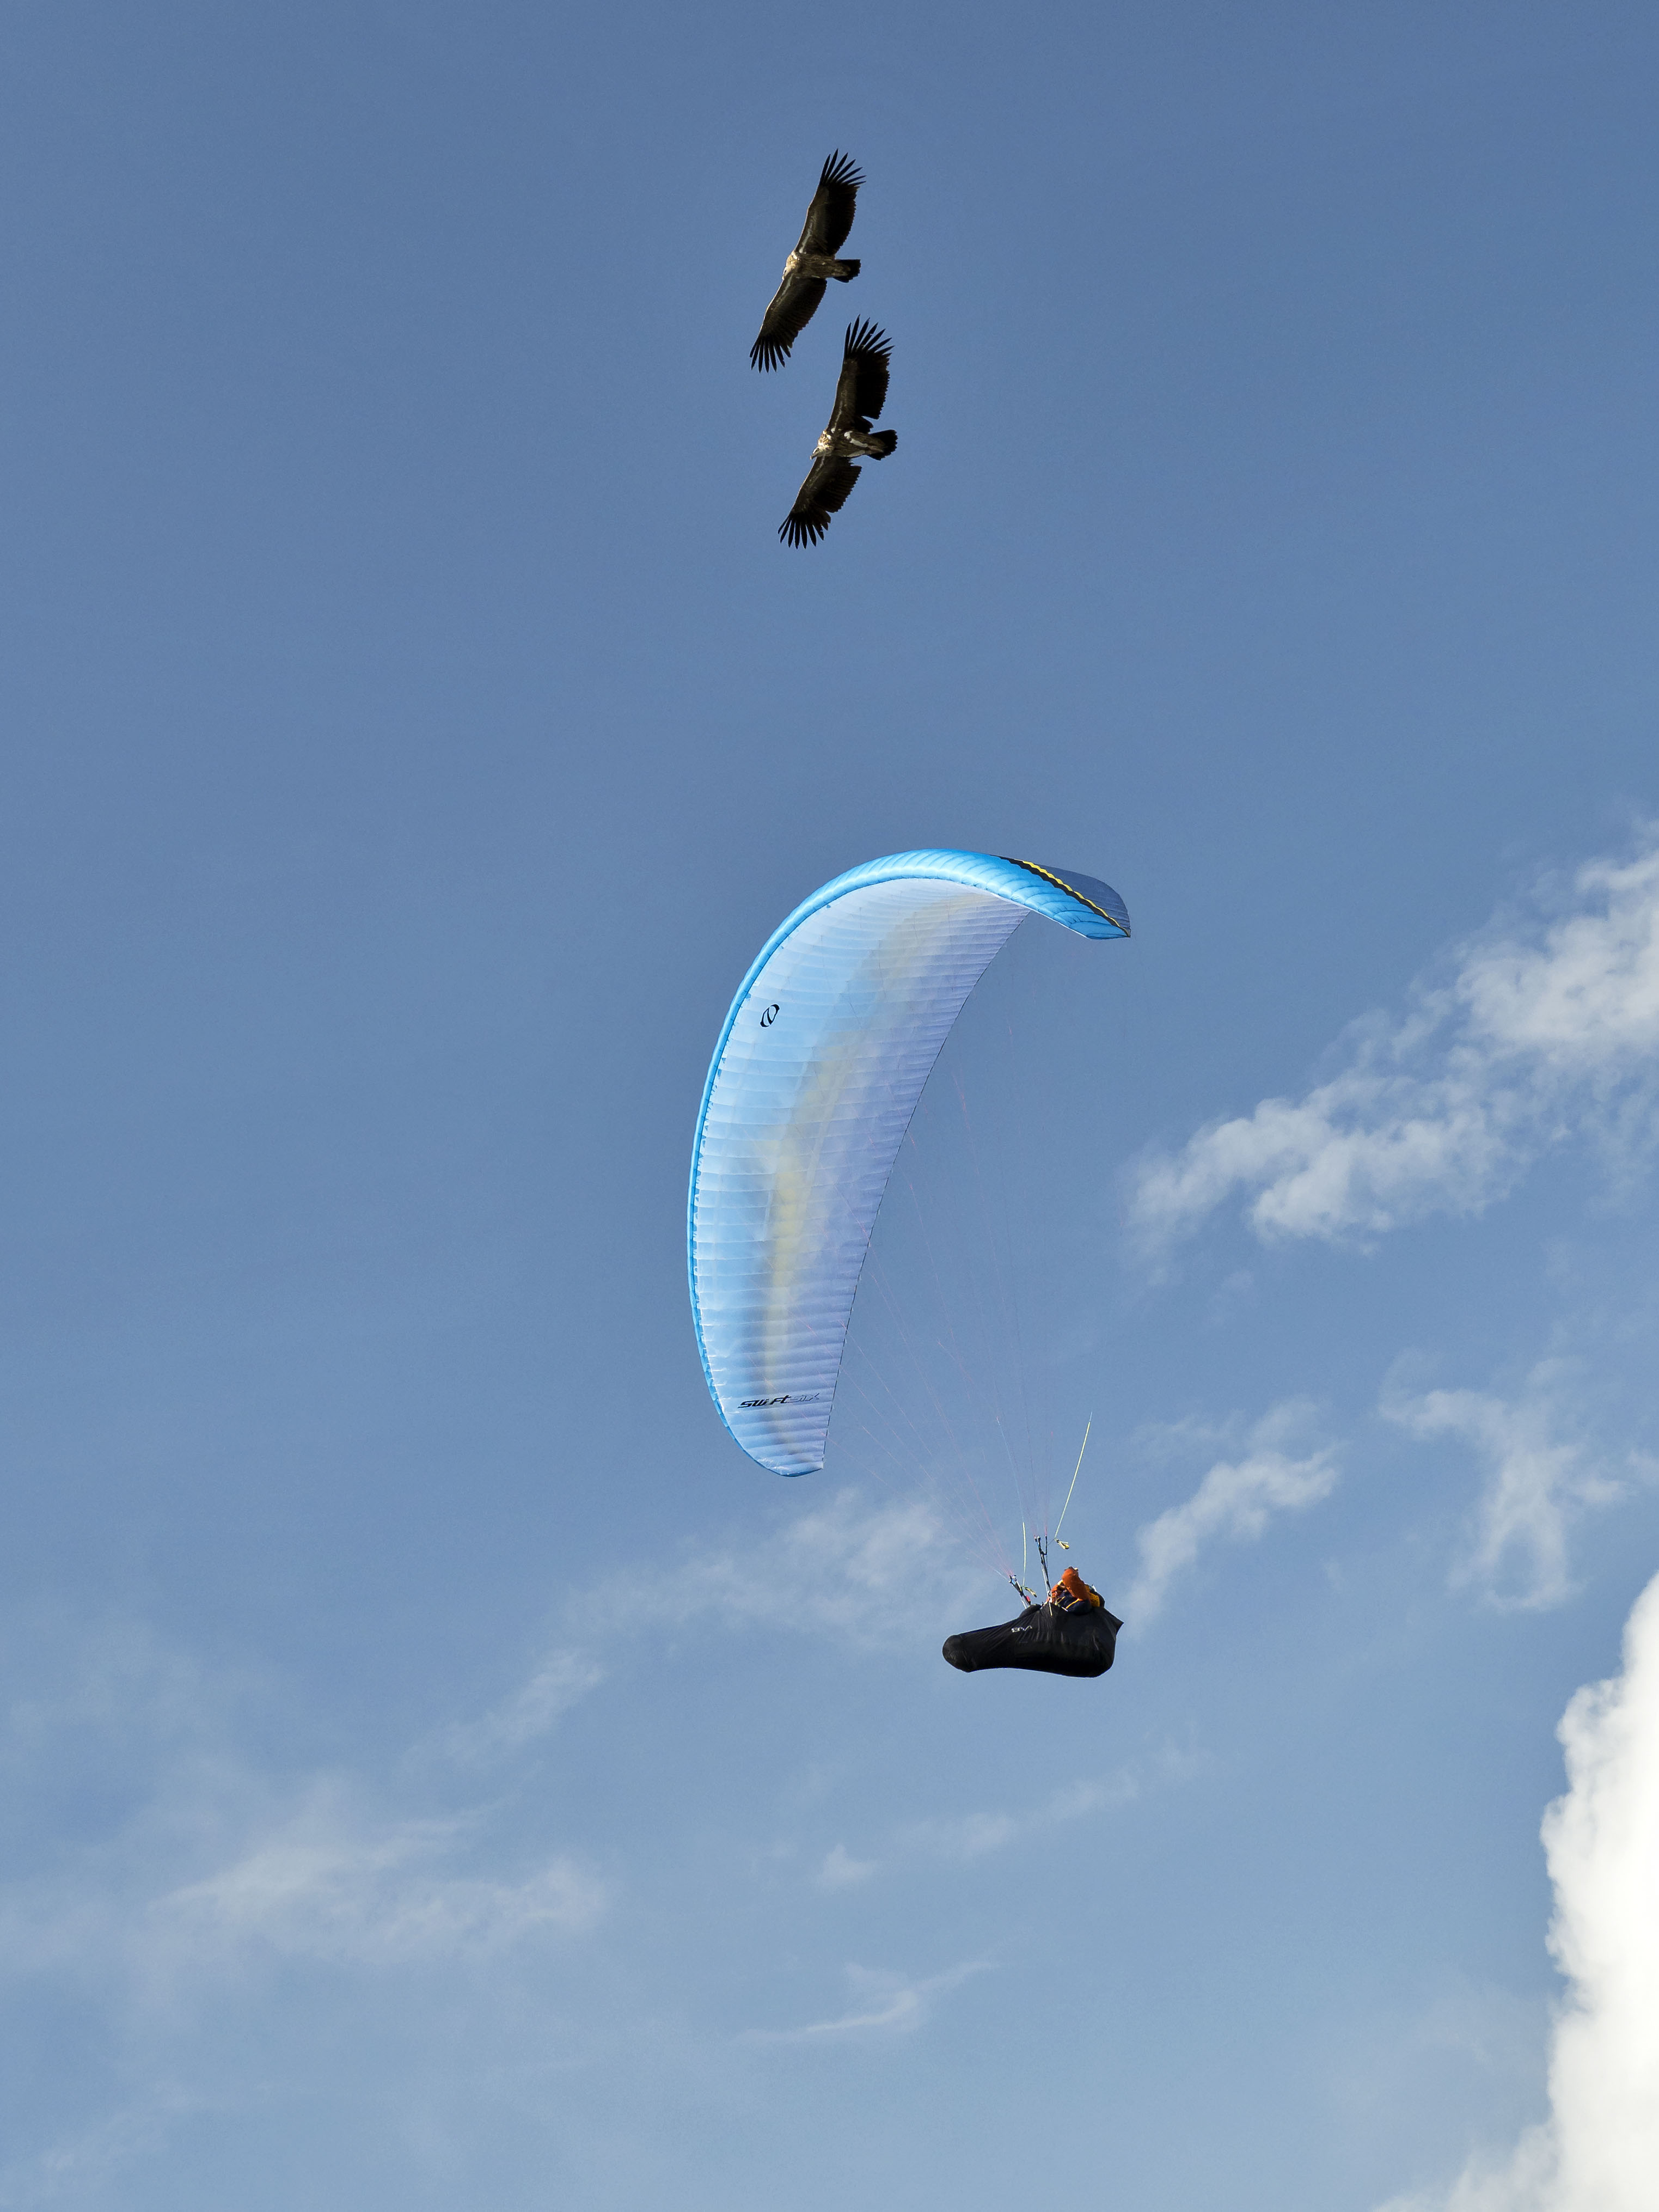 2 Himalayan vulture fly over a paraglide Ozone Swift 6